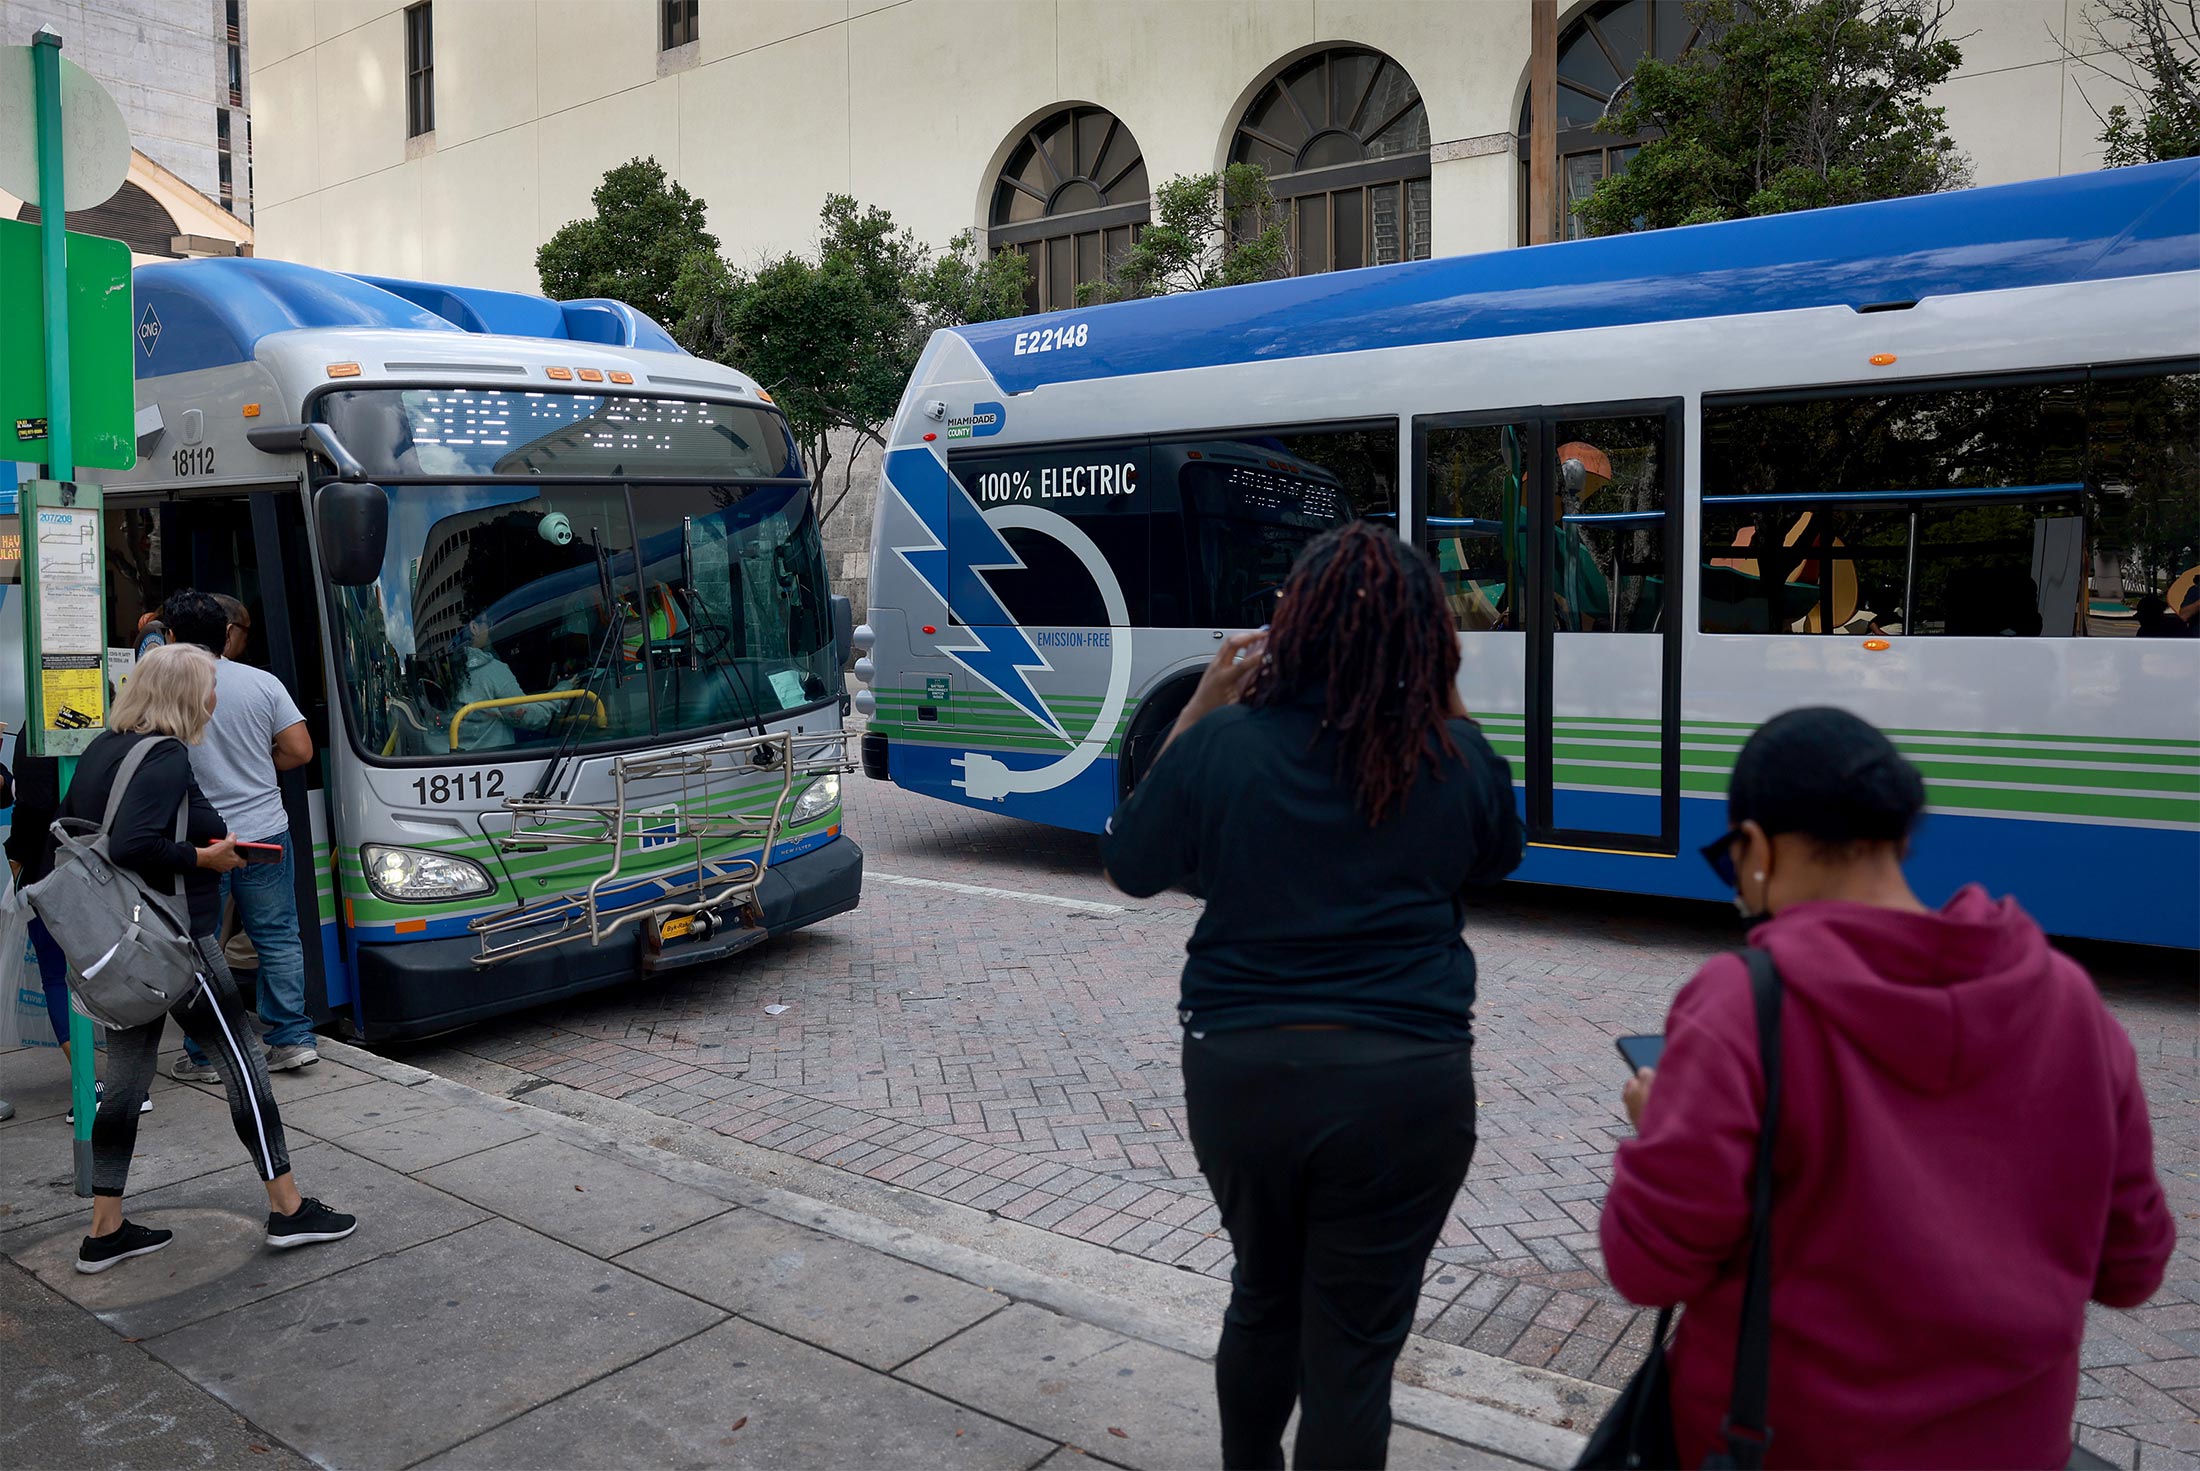 Electric bus maker Proterra filed for Chapter 11 protection earlier this year.